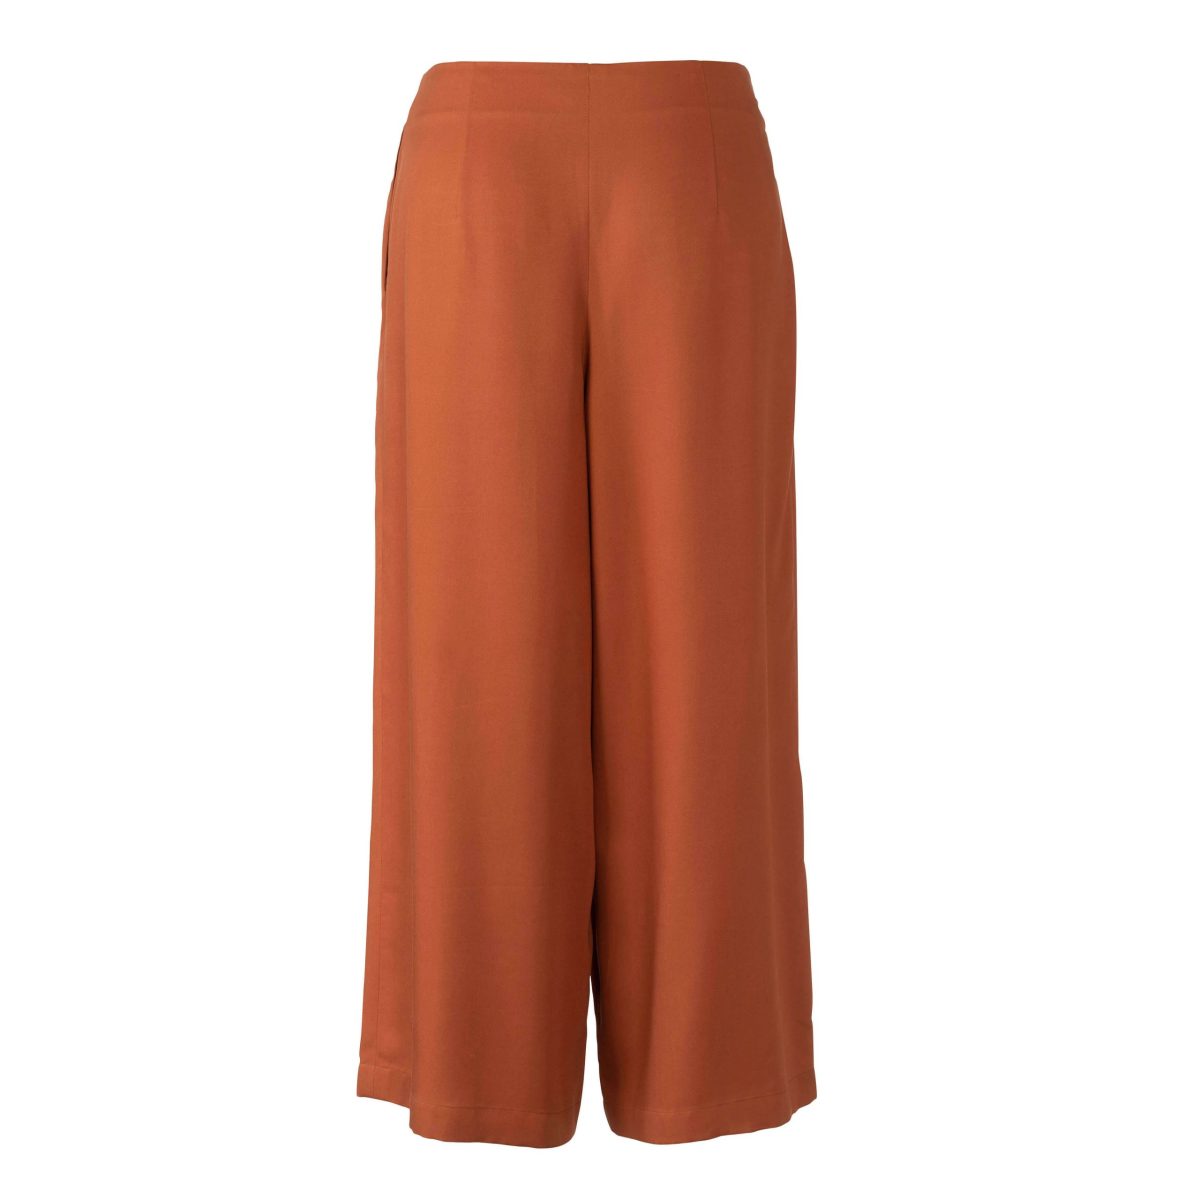 Burda Style Pattern 6035 Misses’ Trousers and Culottes - Sewdirect